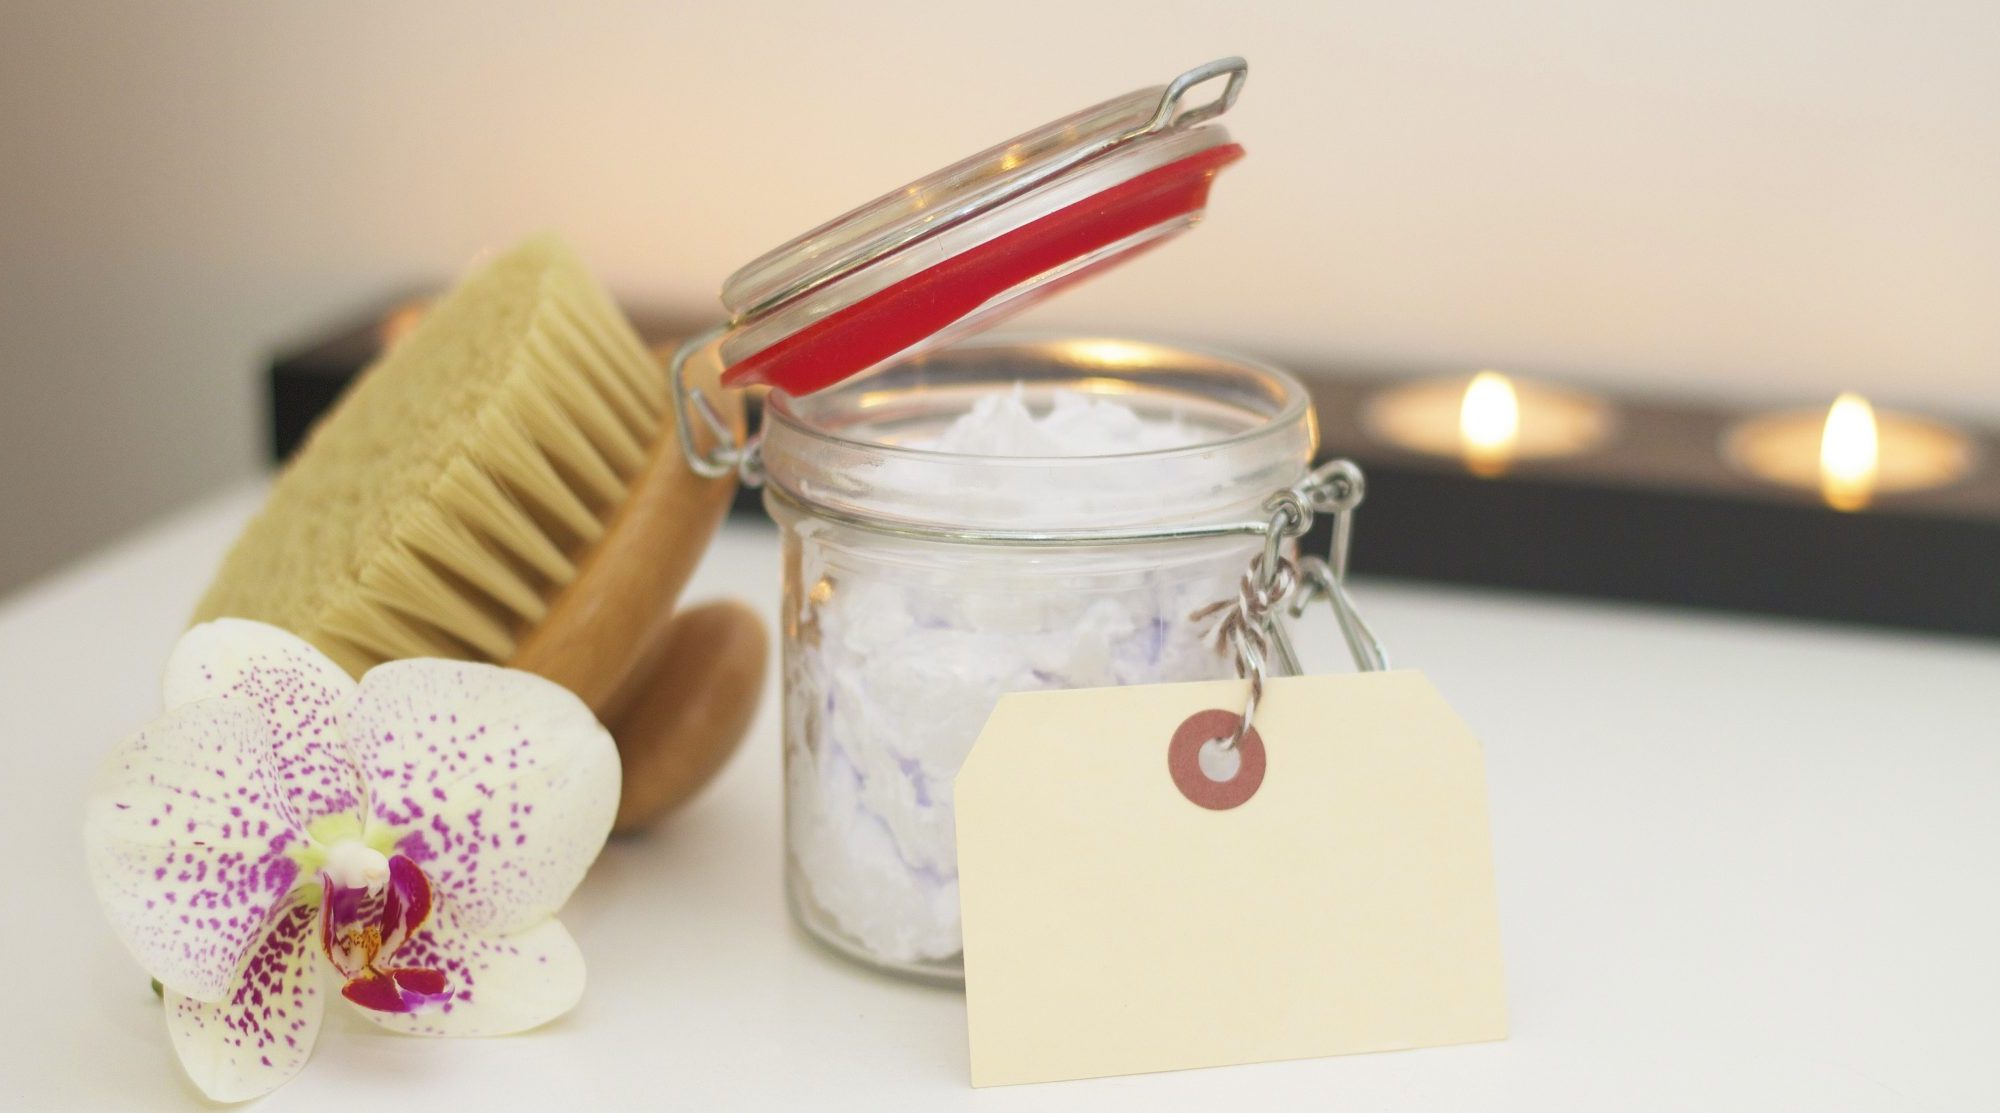 Body brushing for smooth and supple skin